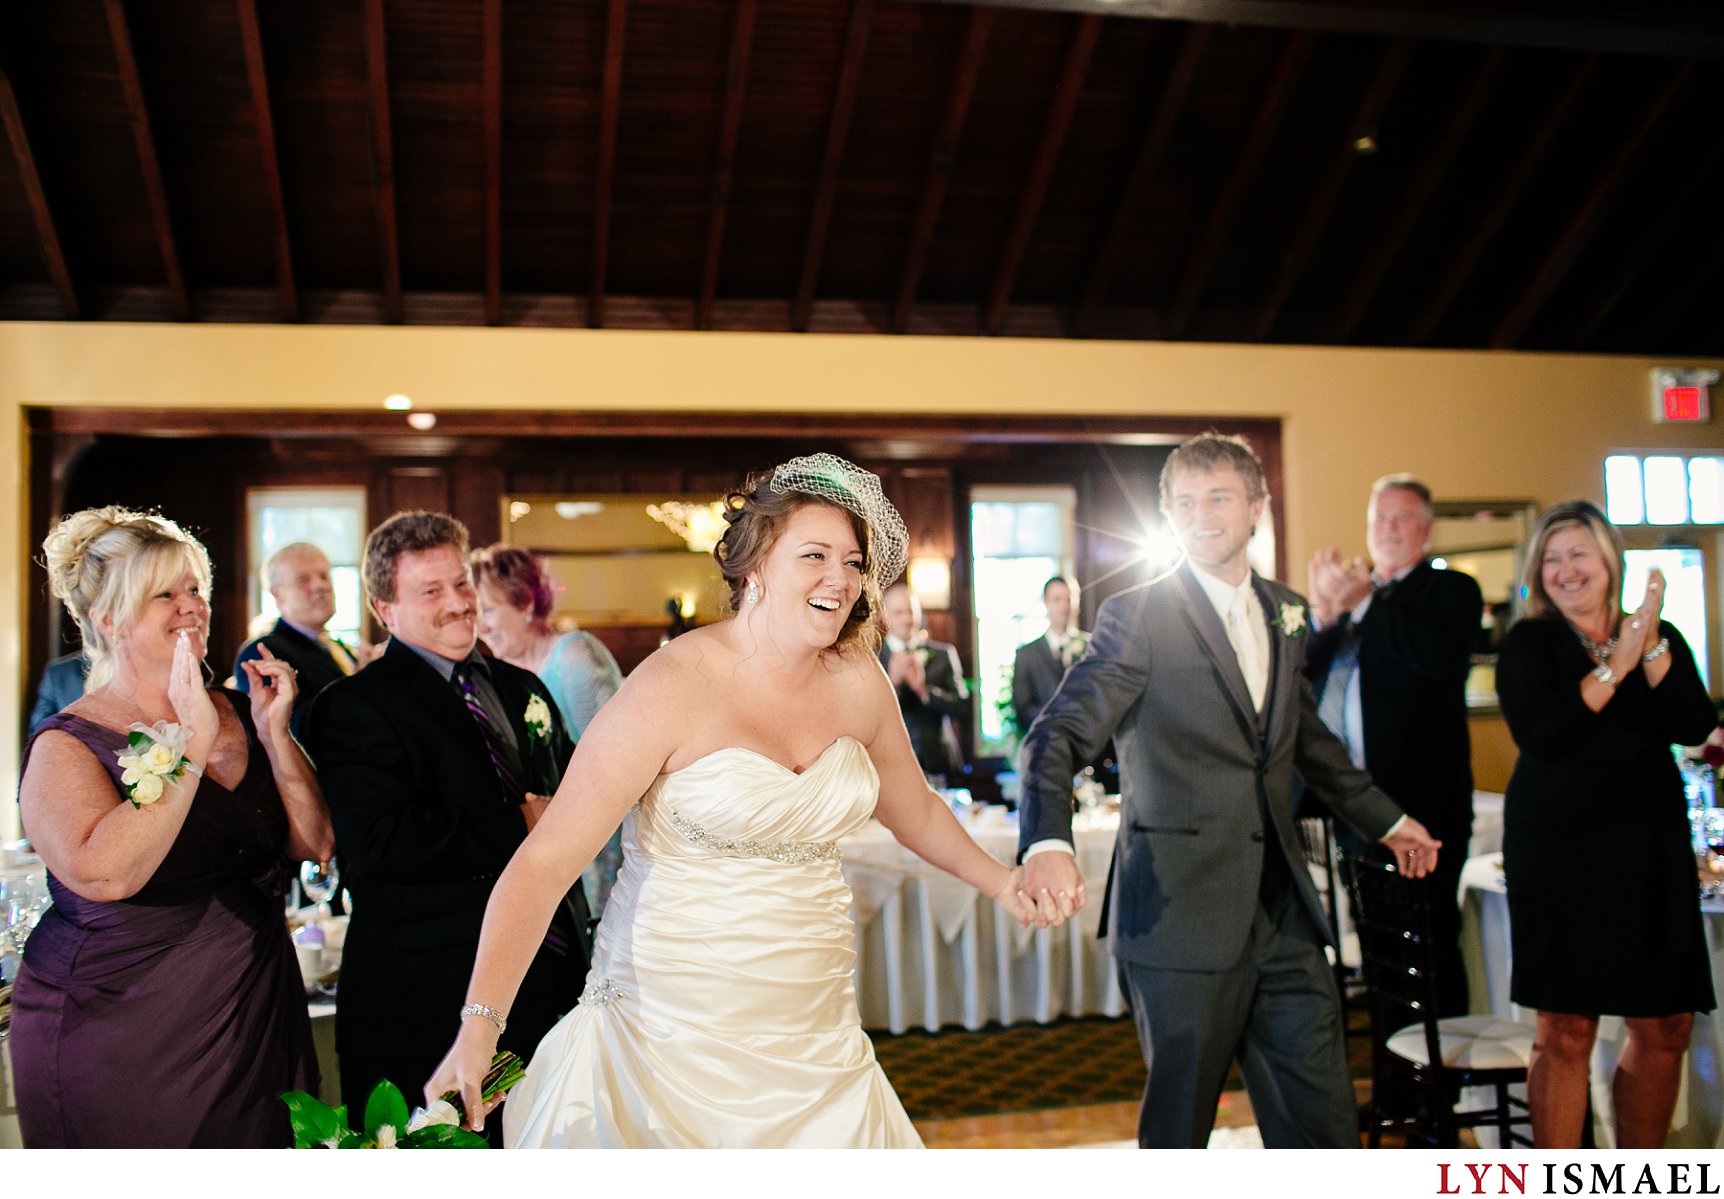 The bride and groom are welcomed by their guests at their Cutten Fields wedding reception.